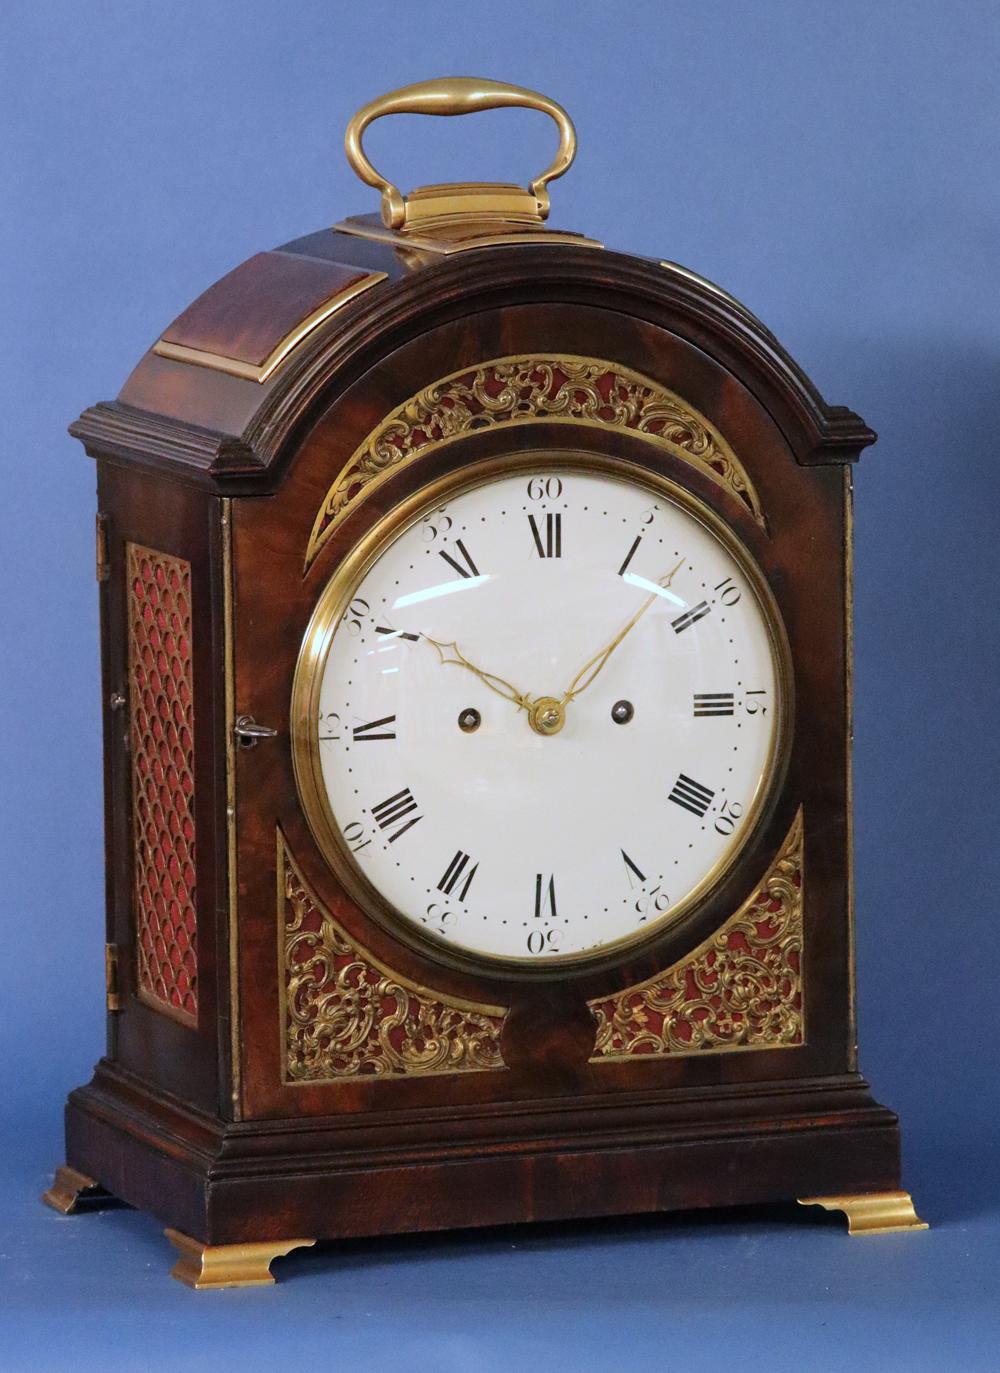 c.1800 English Bracket Clock with Exceptional Movement In Good Condition For Sale In Greenlawn, NY